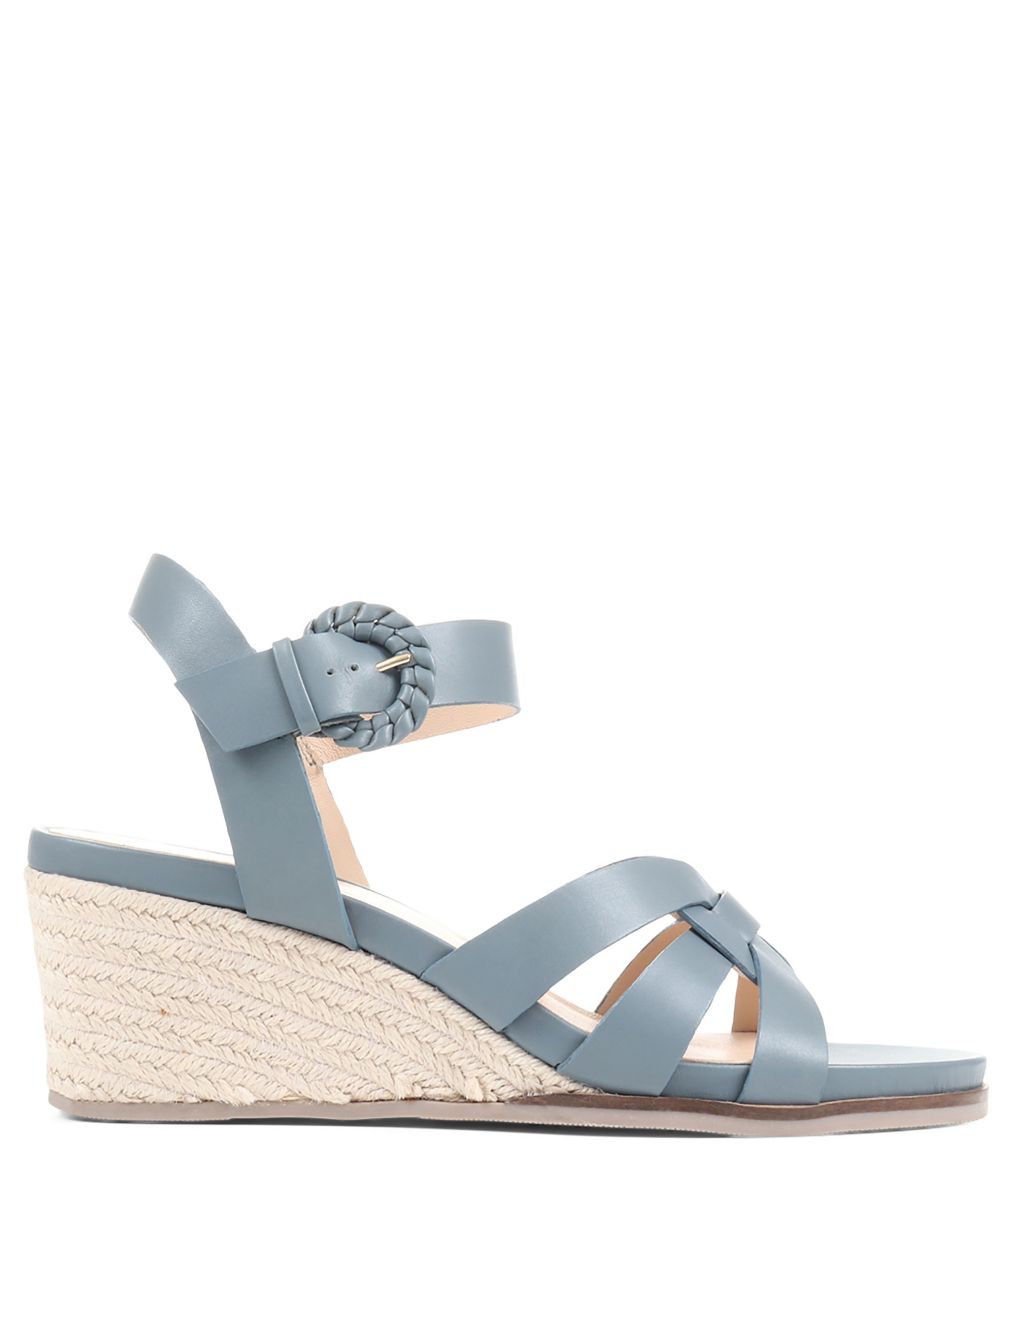 Leather Strappy Wedge Sandals image 2